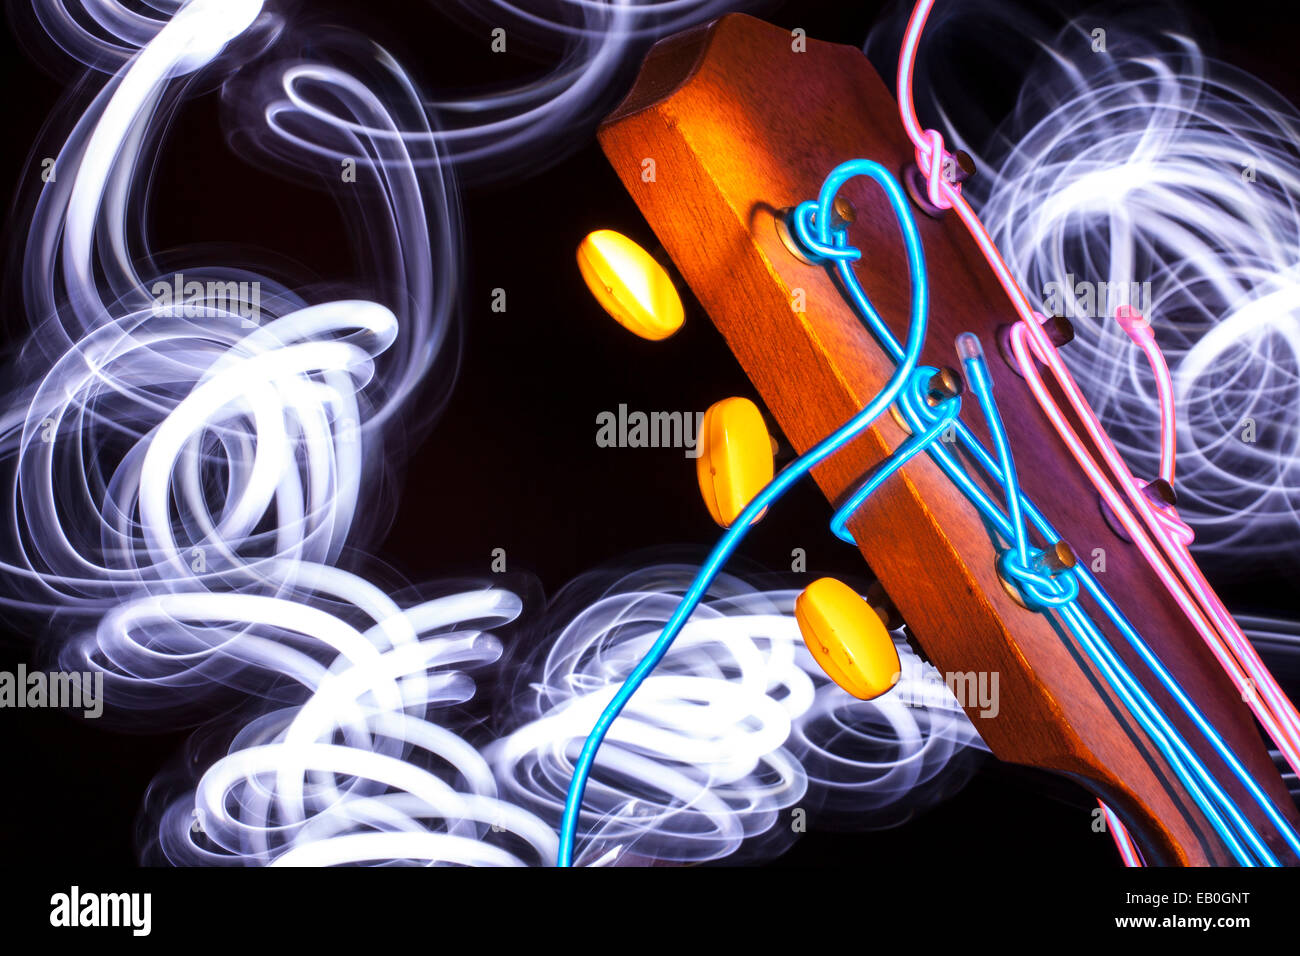 Acoustic guitar with strings removed and substituted with electro luminescent wire Stock Photo